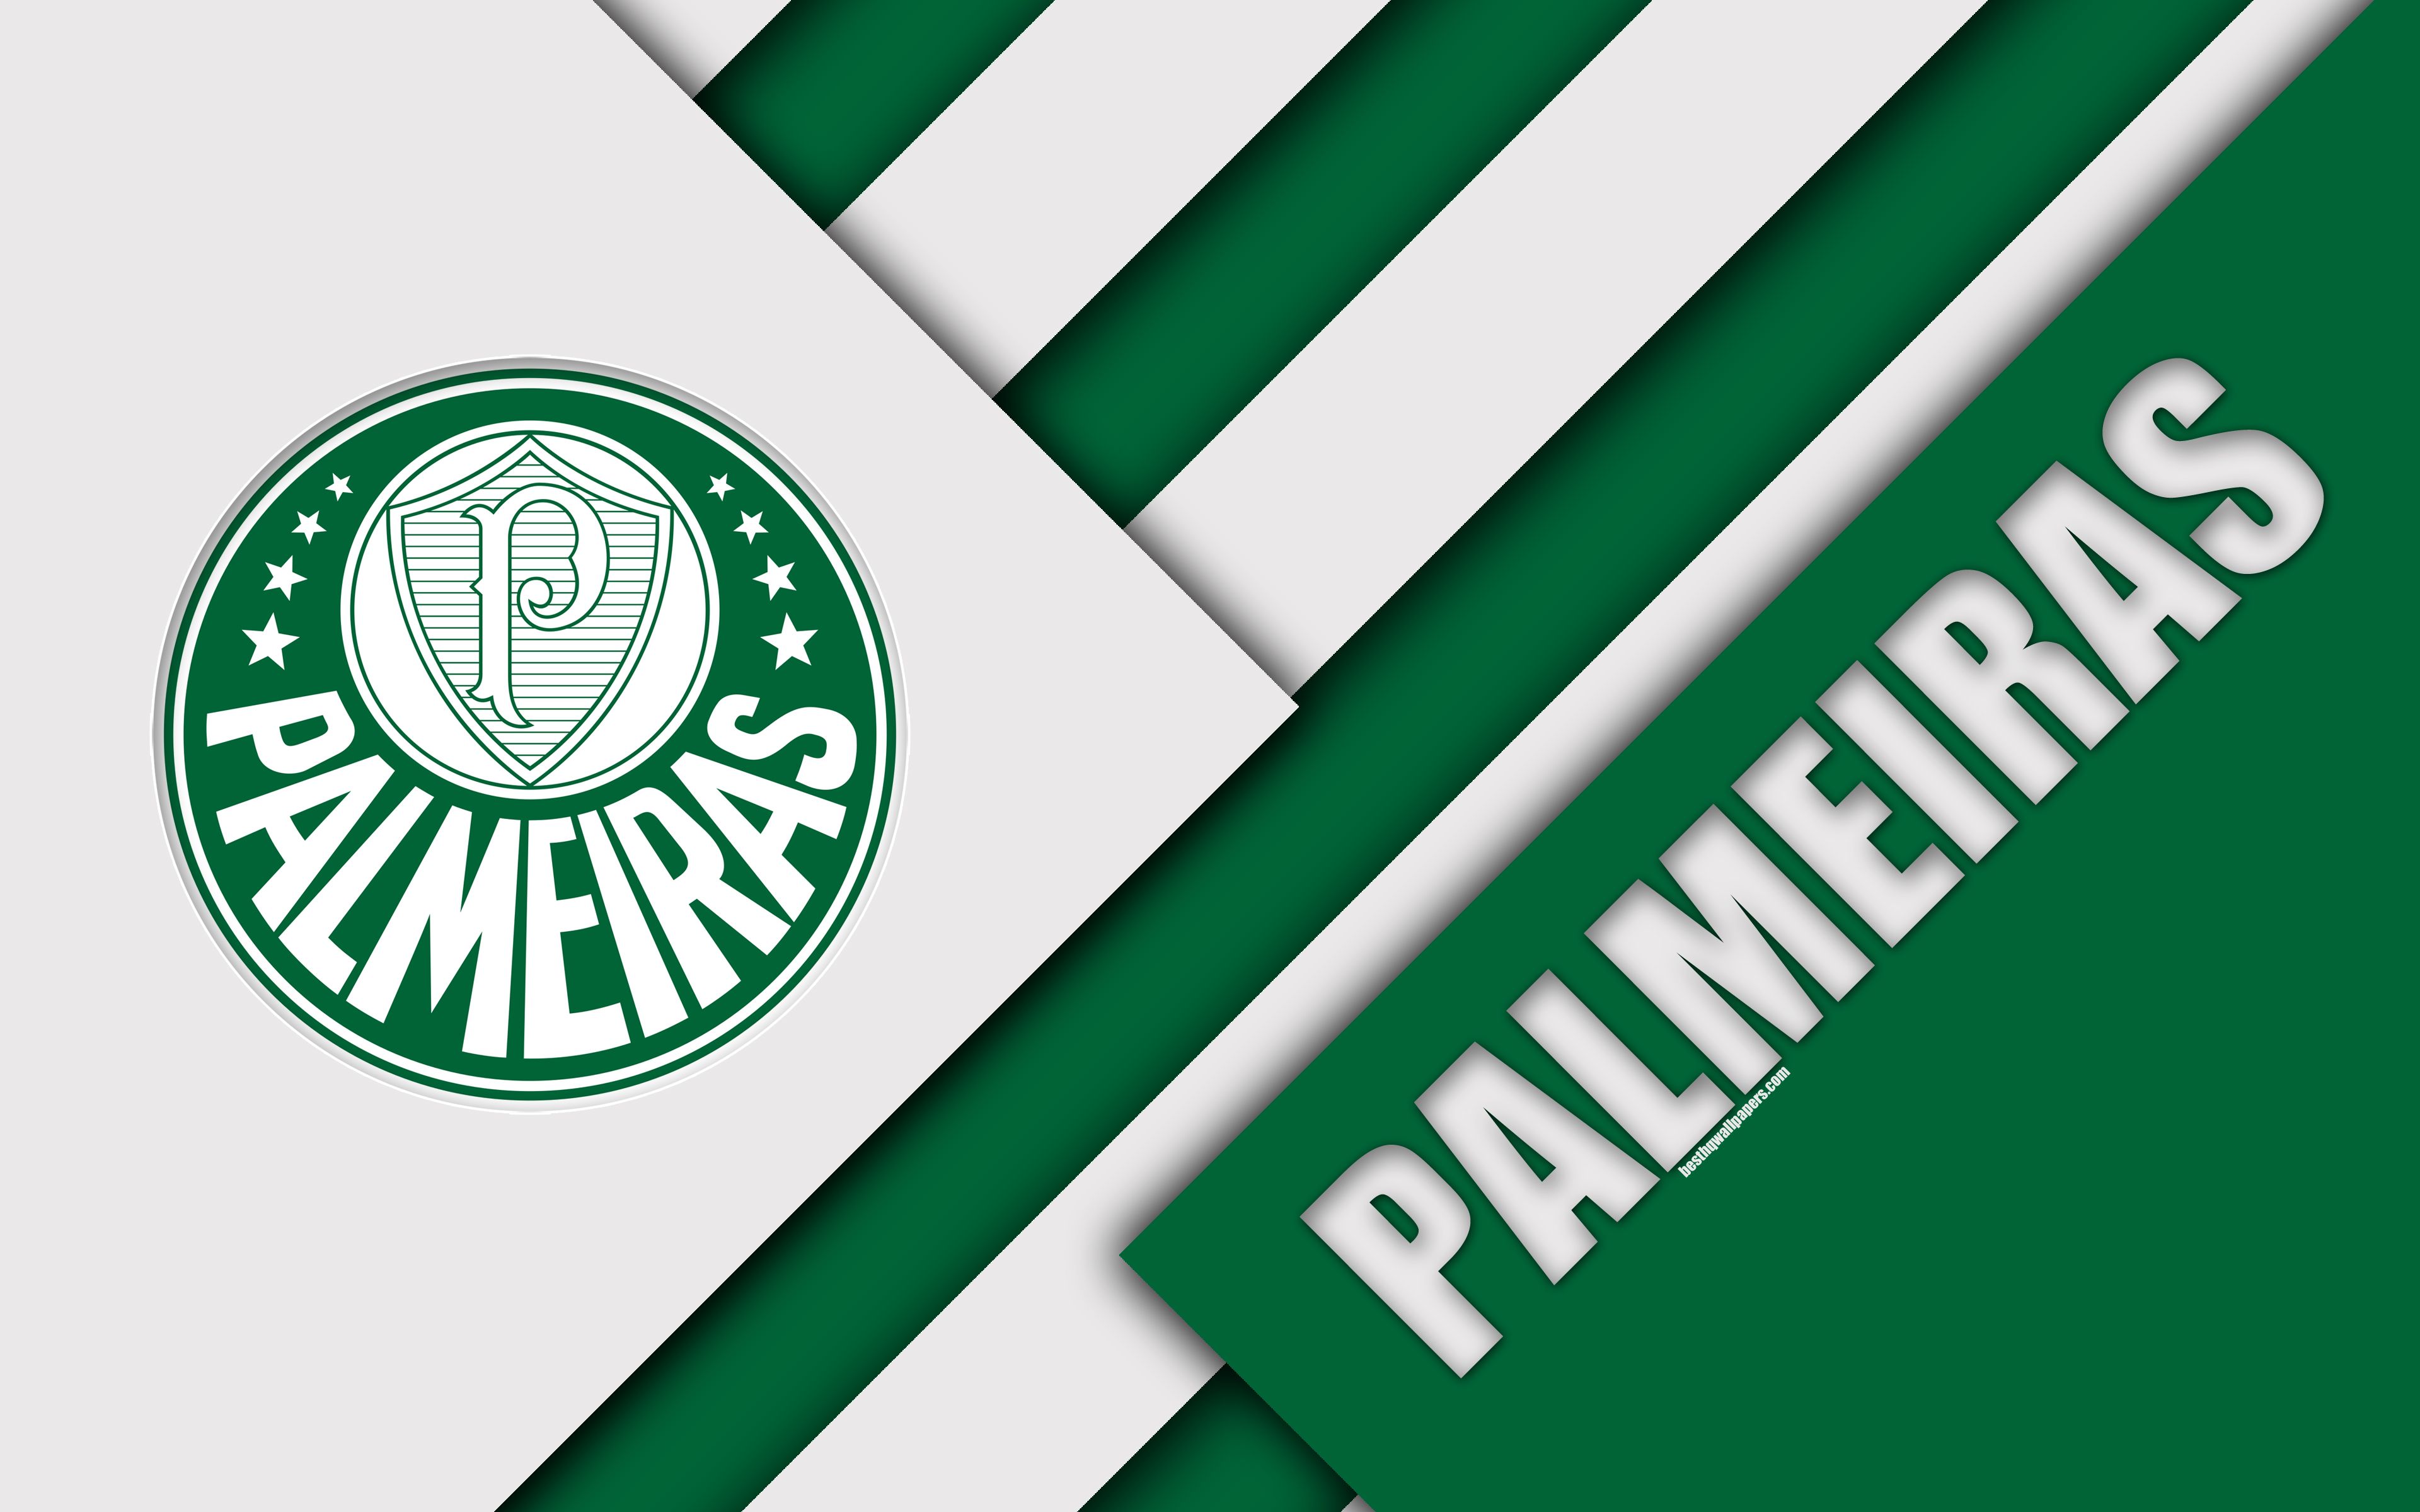 Download wallpaper Palmeiras FC, São Paulo, Brazil, 4k, material design, green white abstraction, Brazilian football club, Serie A, football for desktop with resolution 3840x2400. High Quality HD picture wallpaper